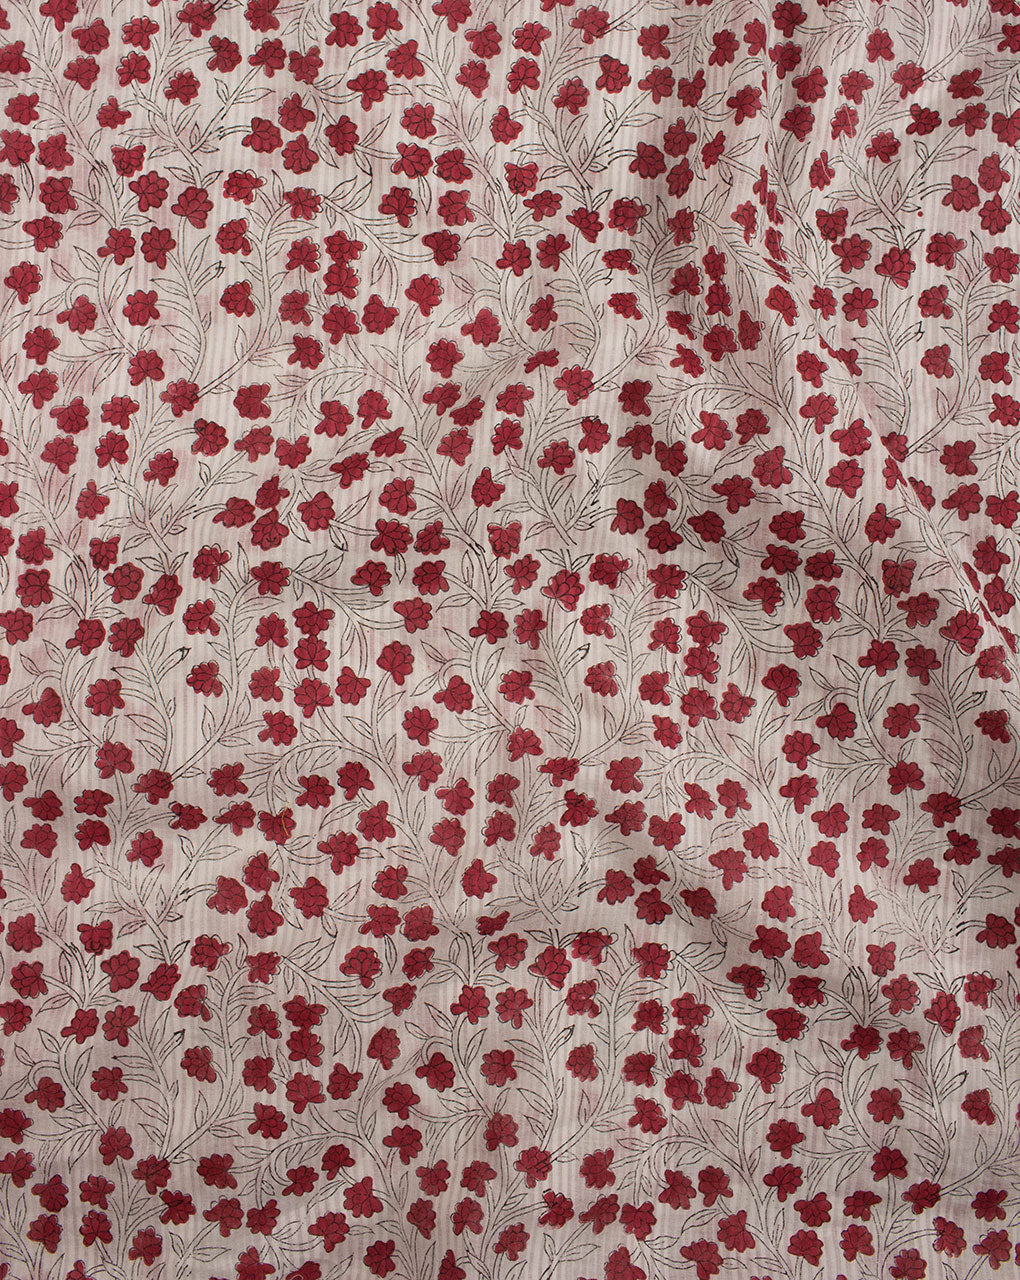 Floral Hand Block Dobby Cotton Fabric - Fabriclore.com